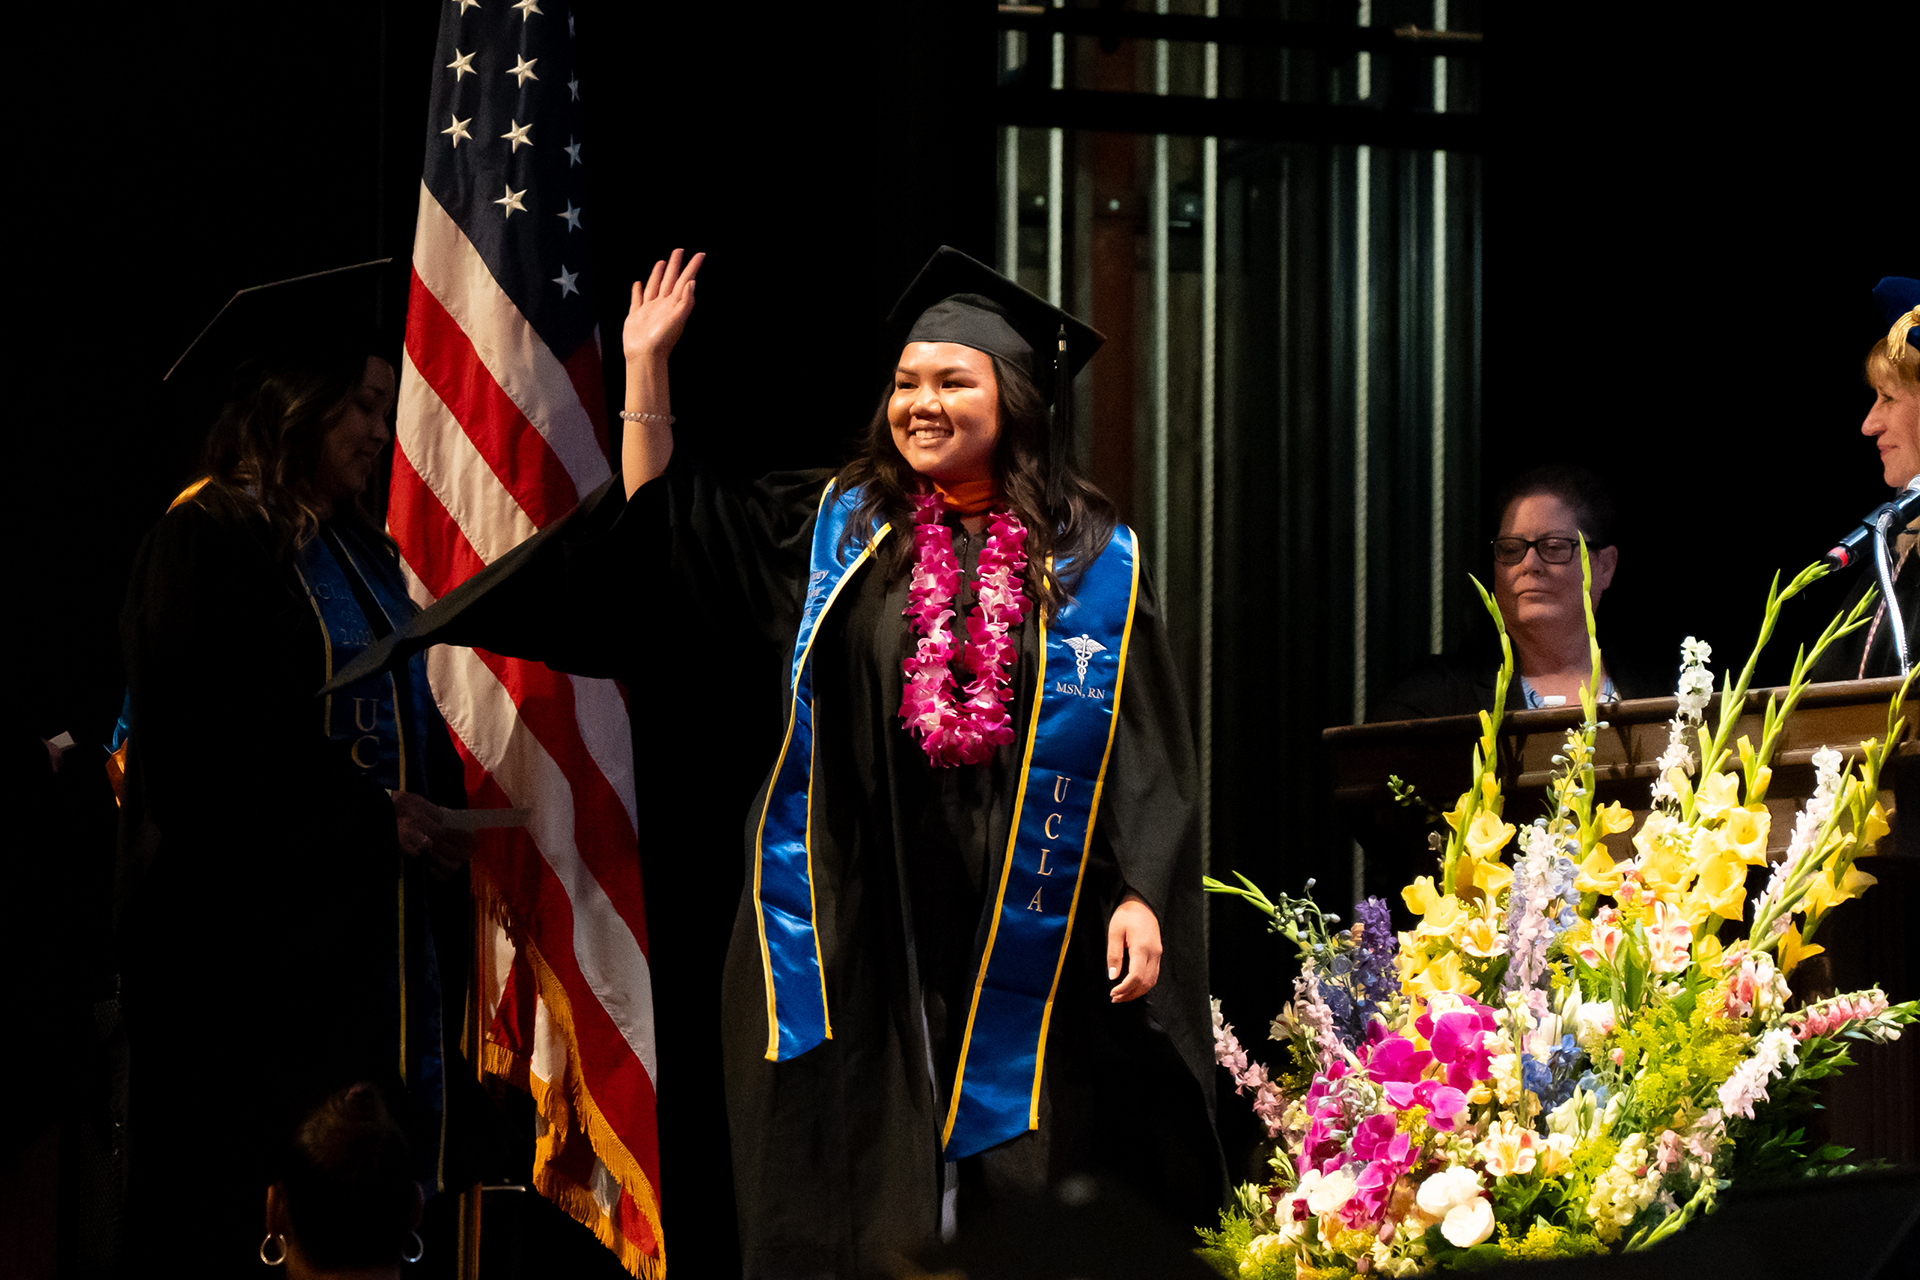 A student walking across the commencement stage